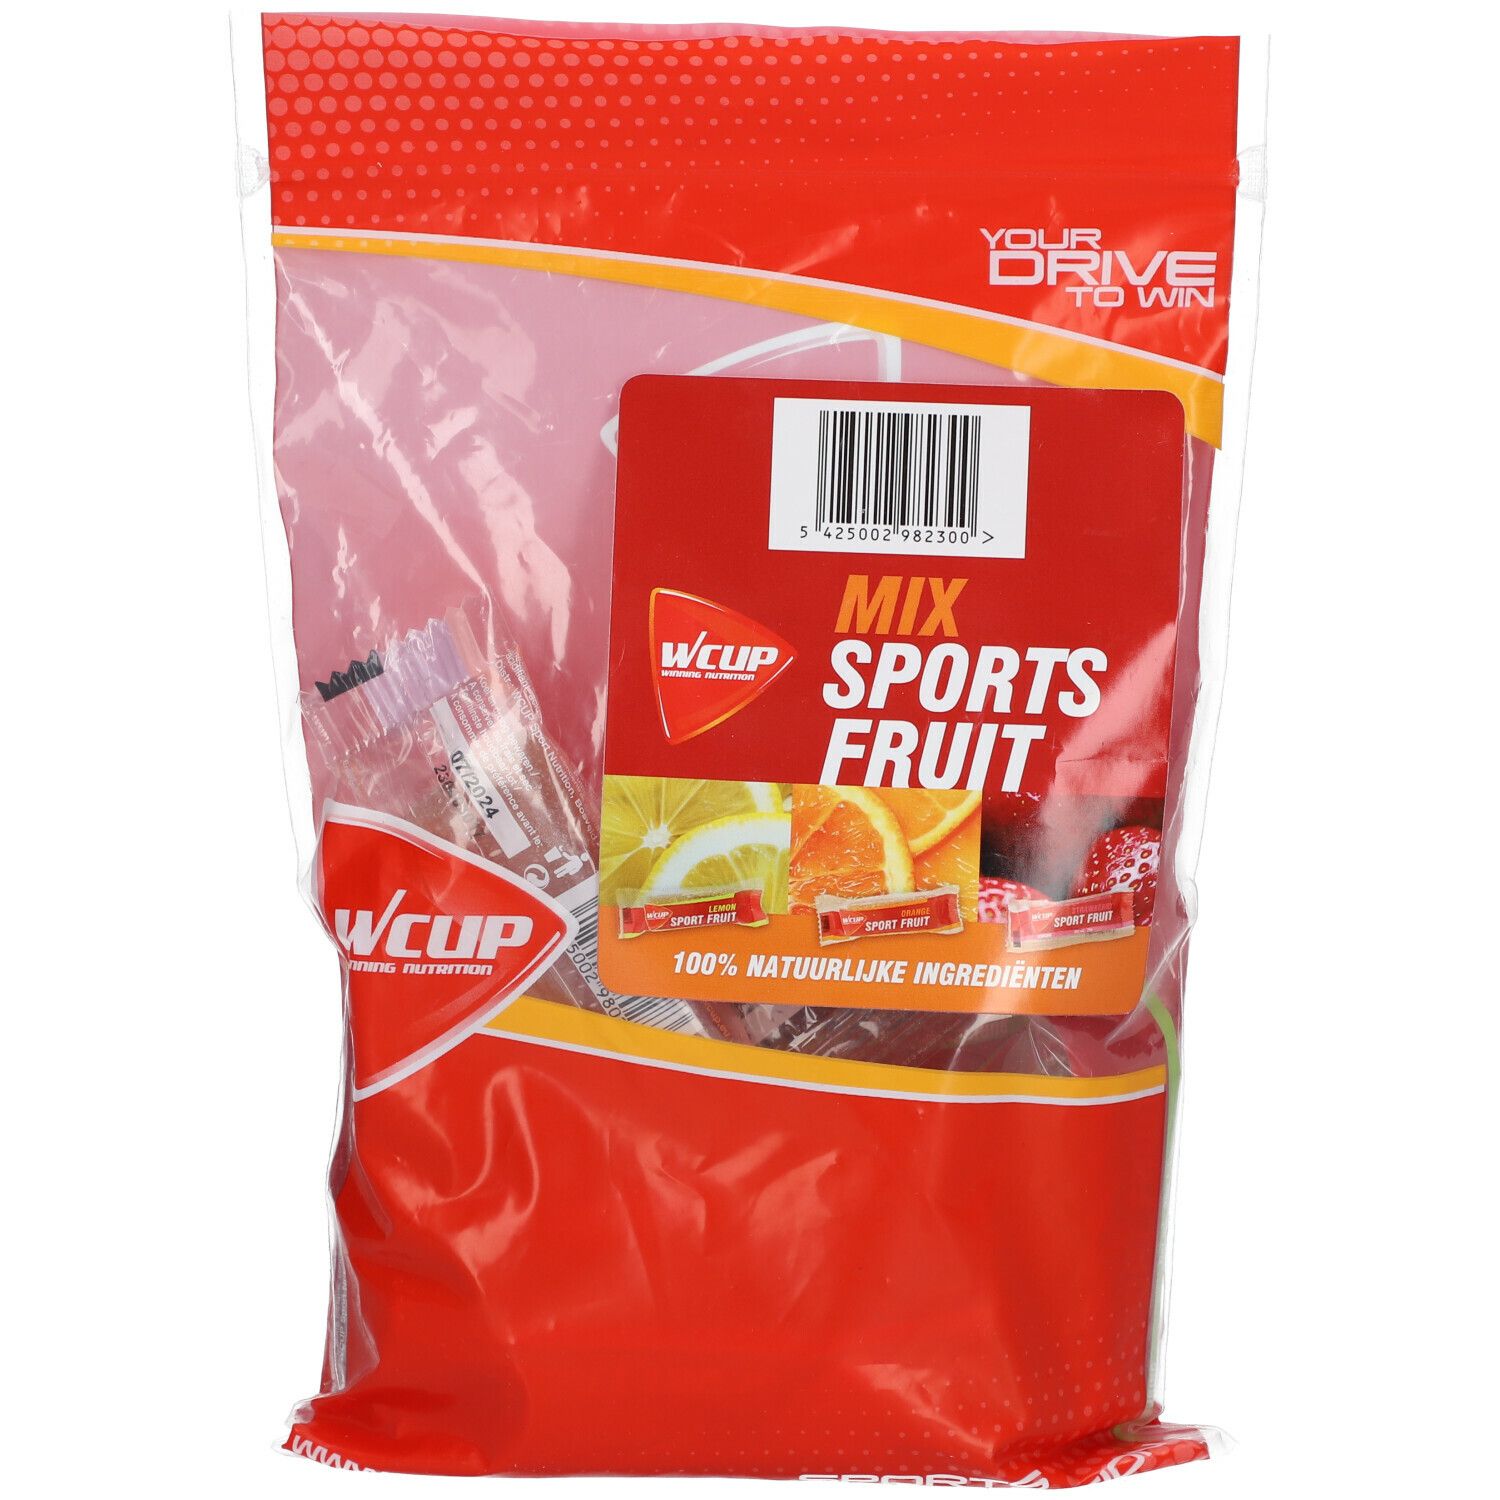 Wcup Sports Fruit Mix